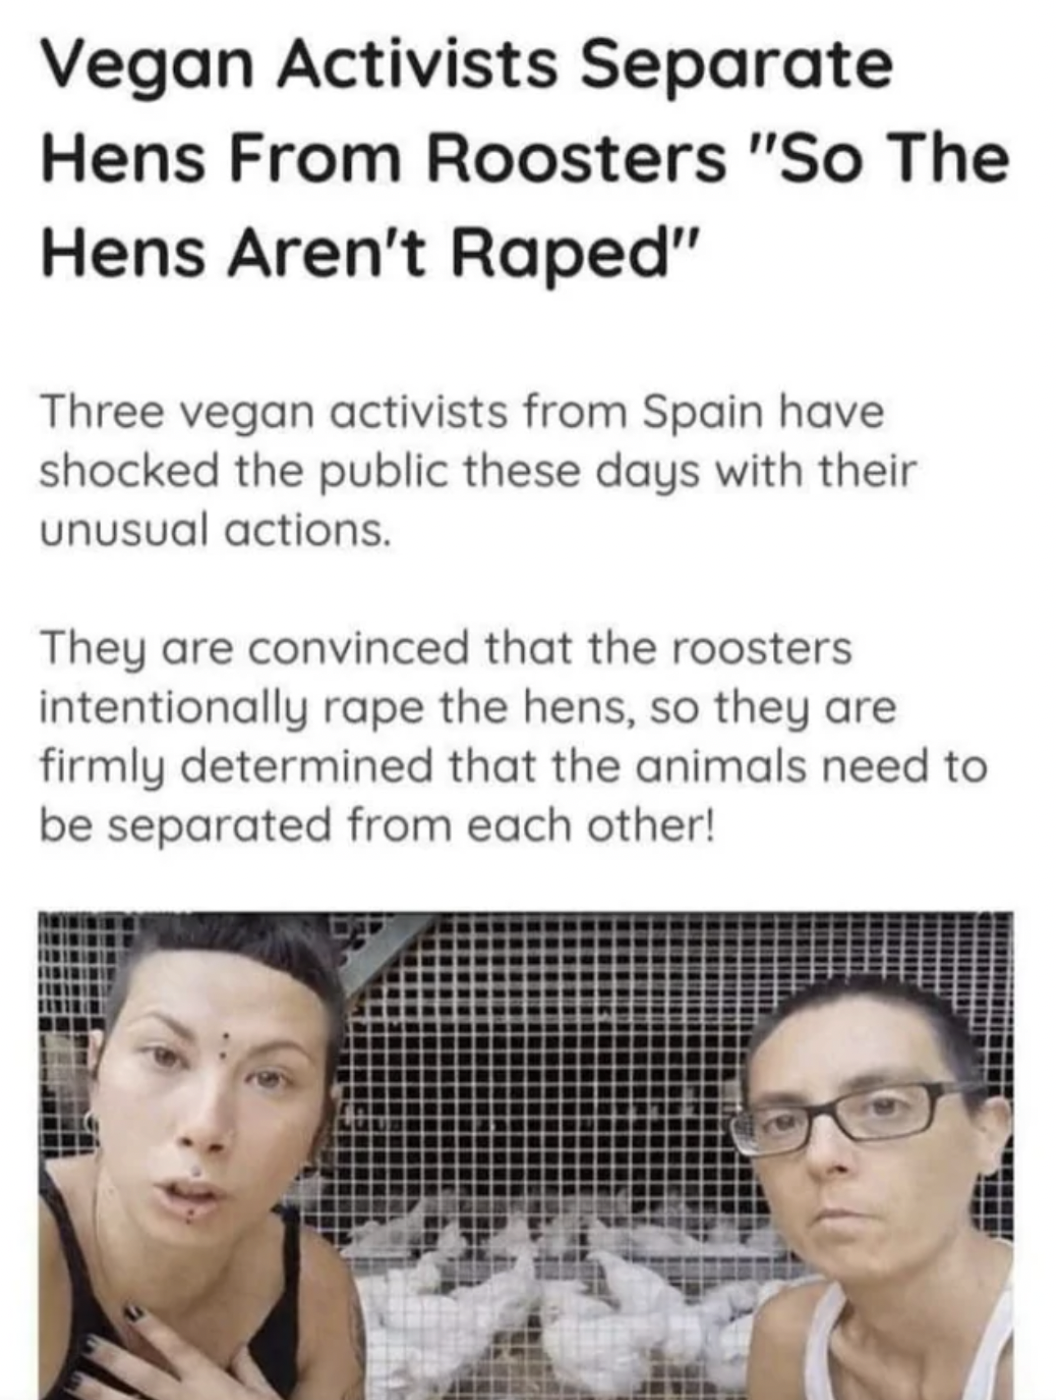 head - Vegan Activists Separate Hens From Roosters